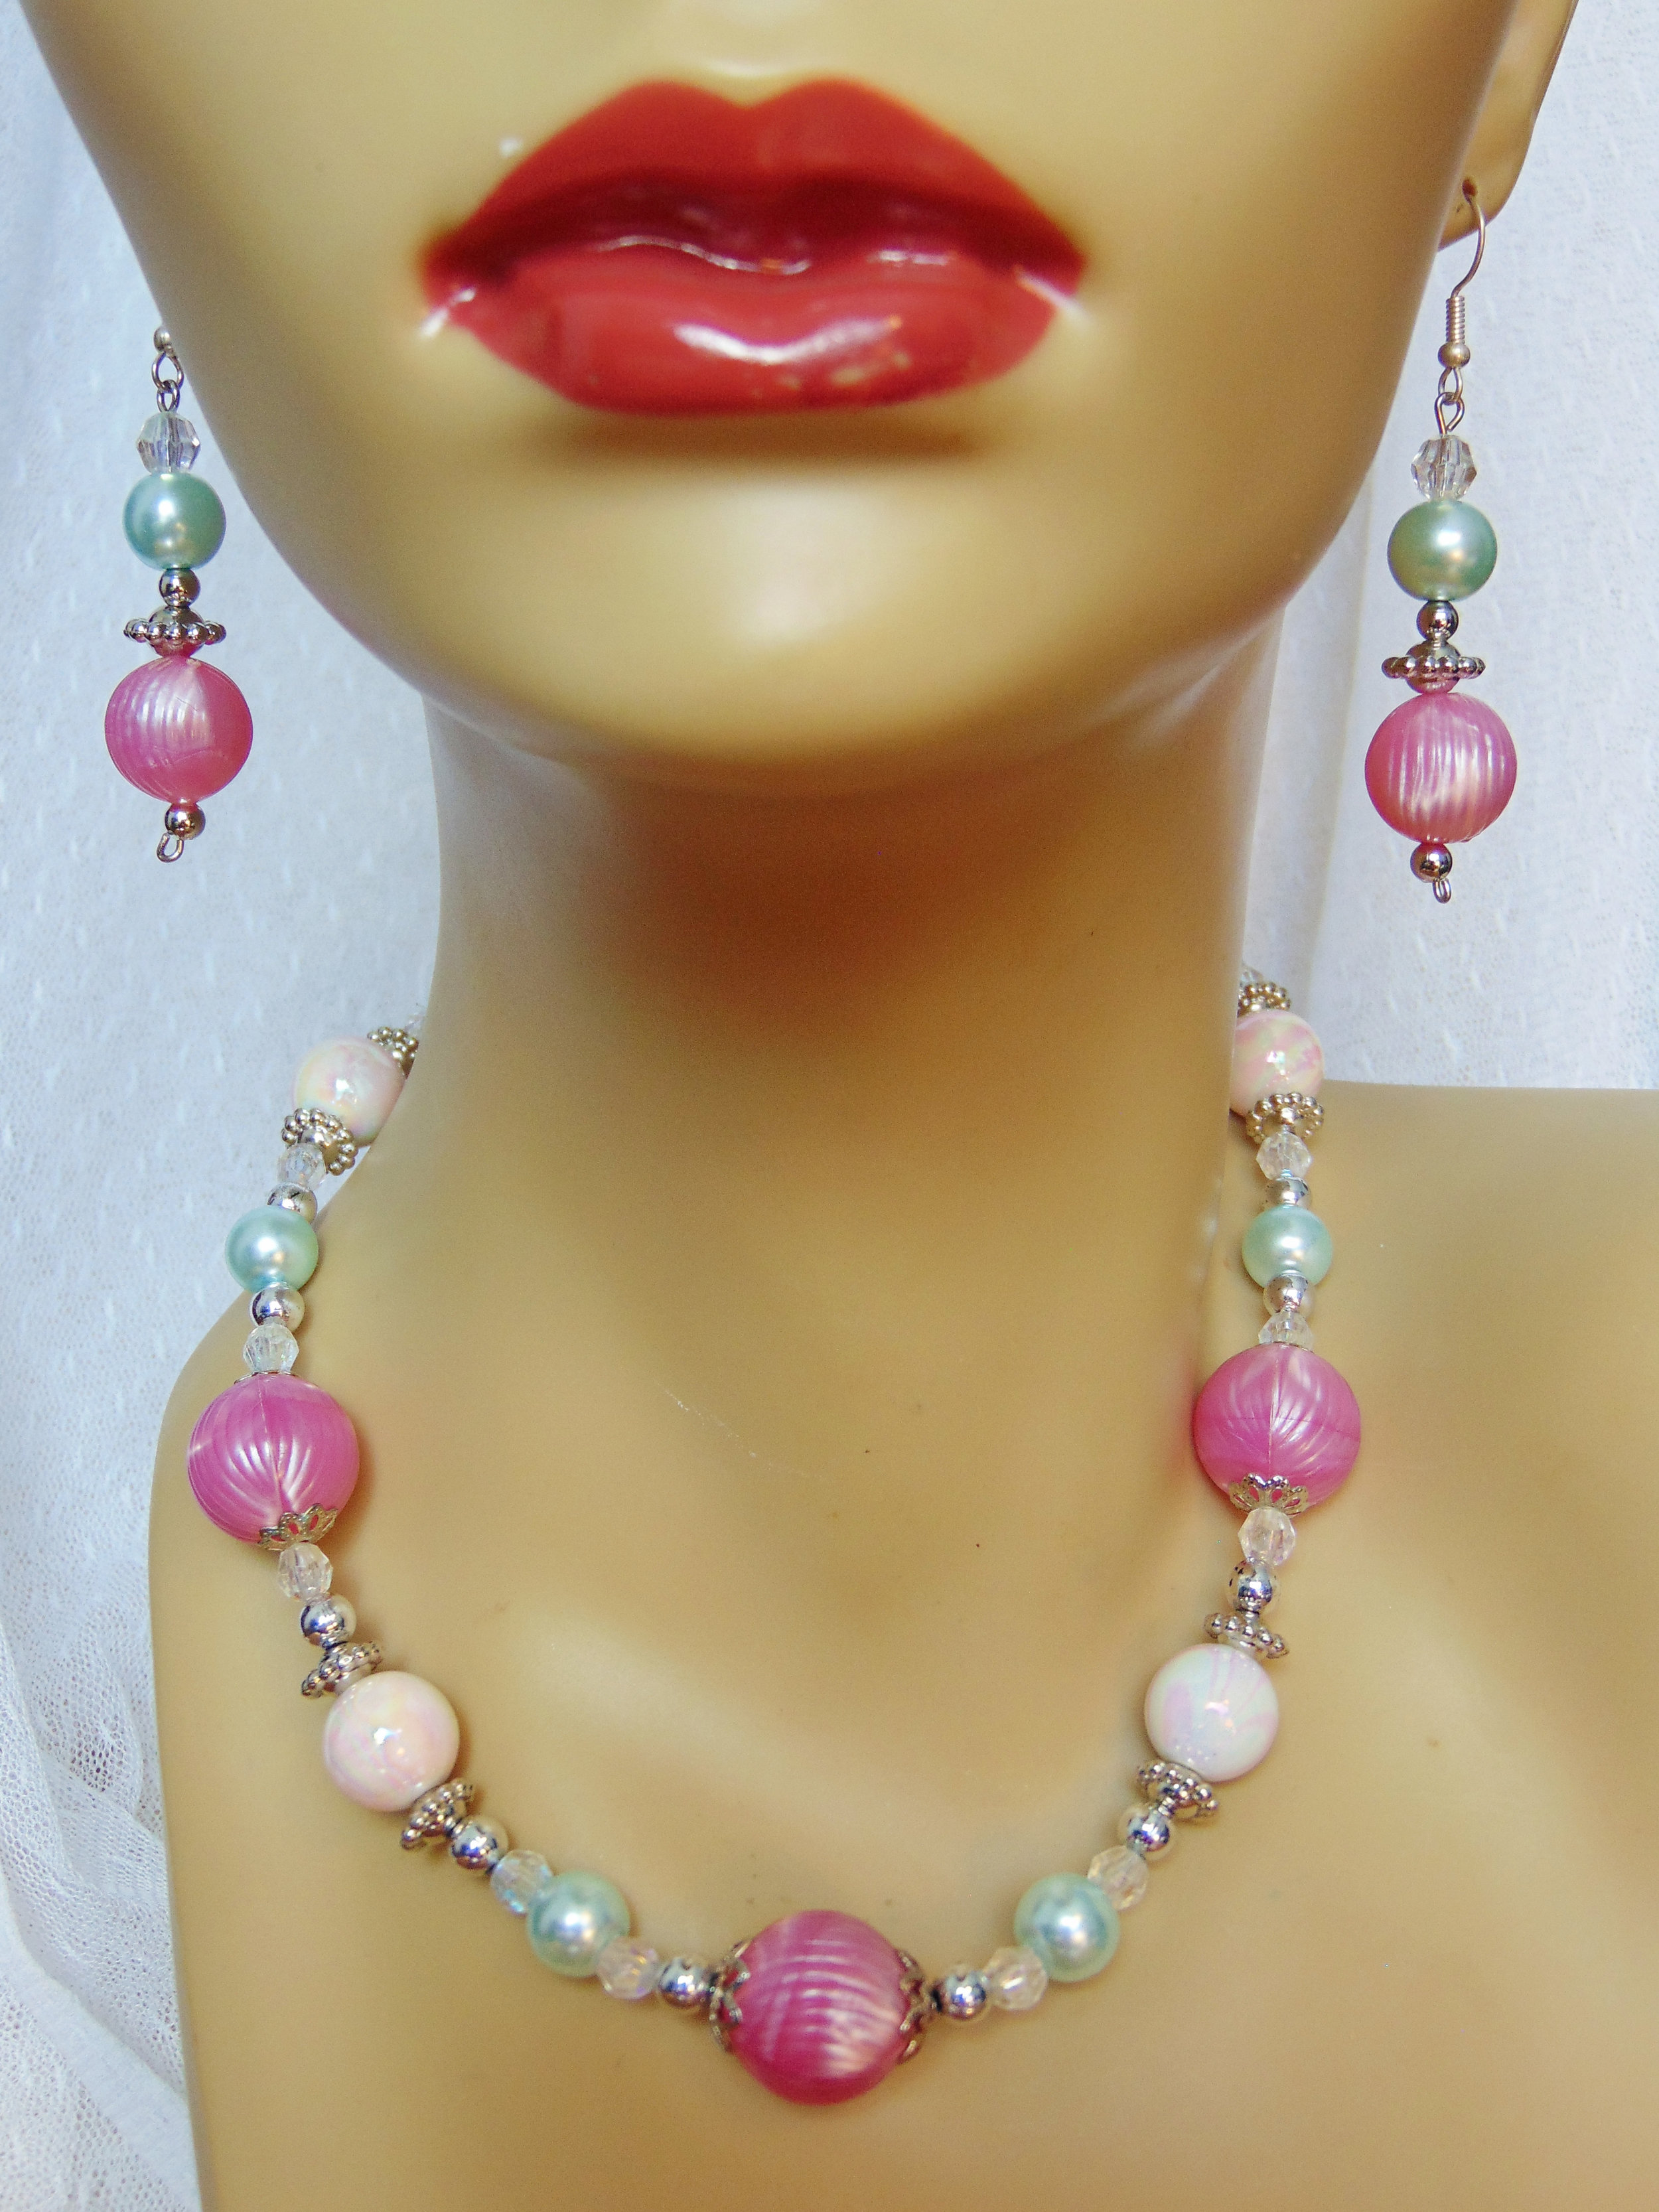 Handmade one of a kind necklace and earring sets by JMB Designs